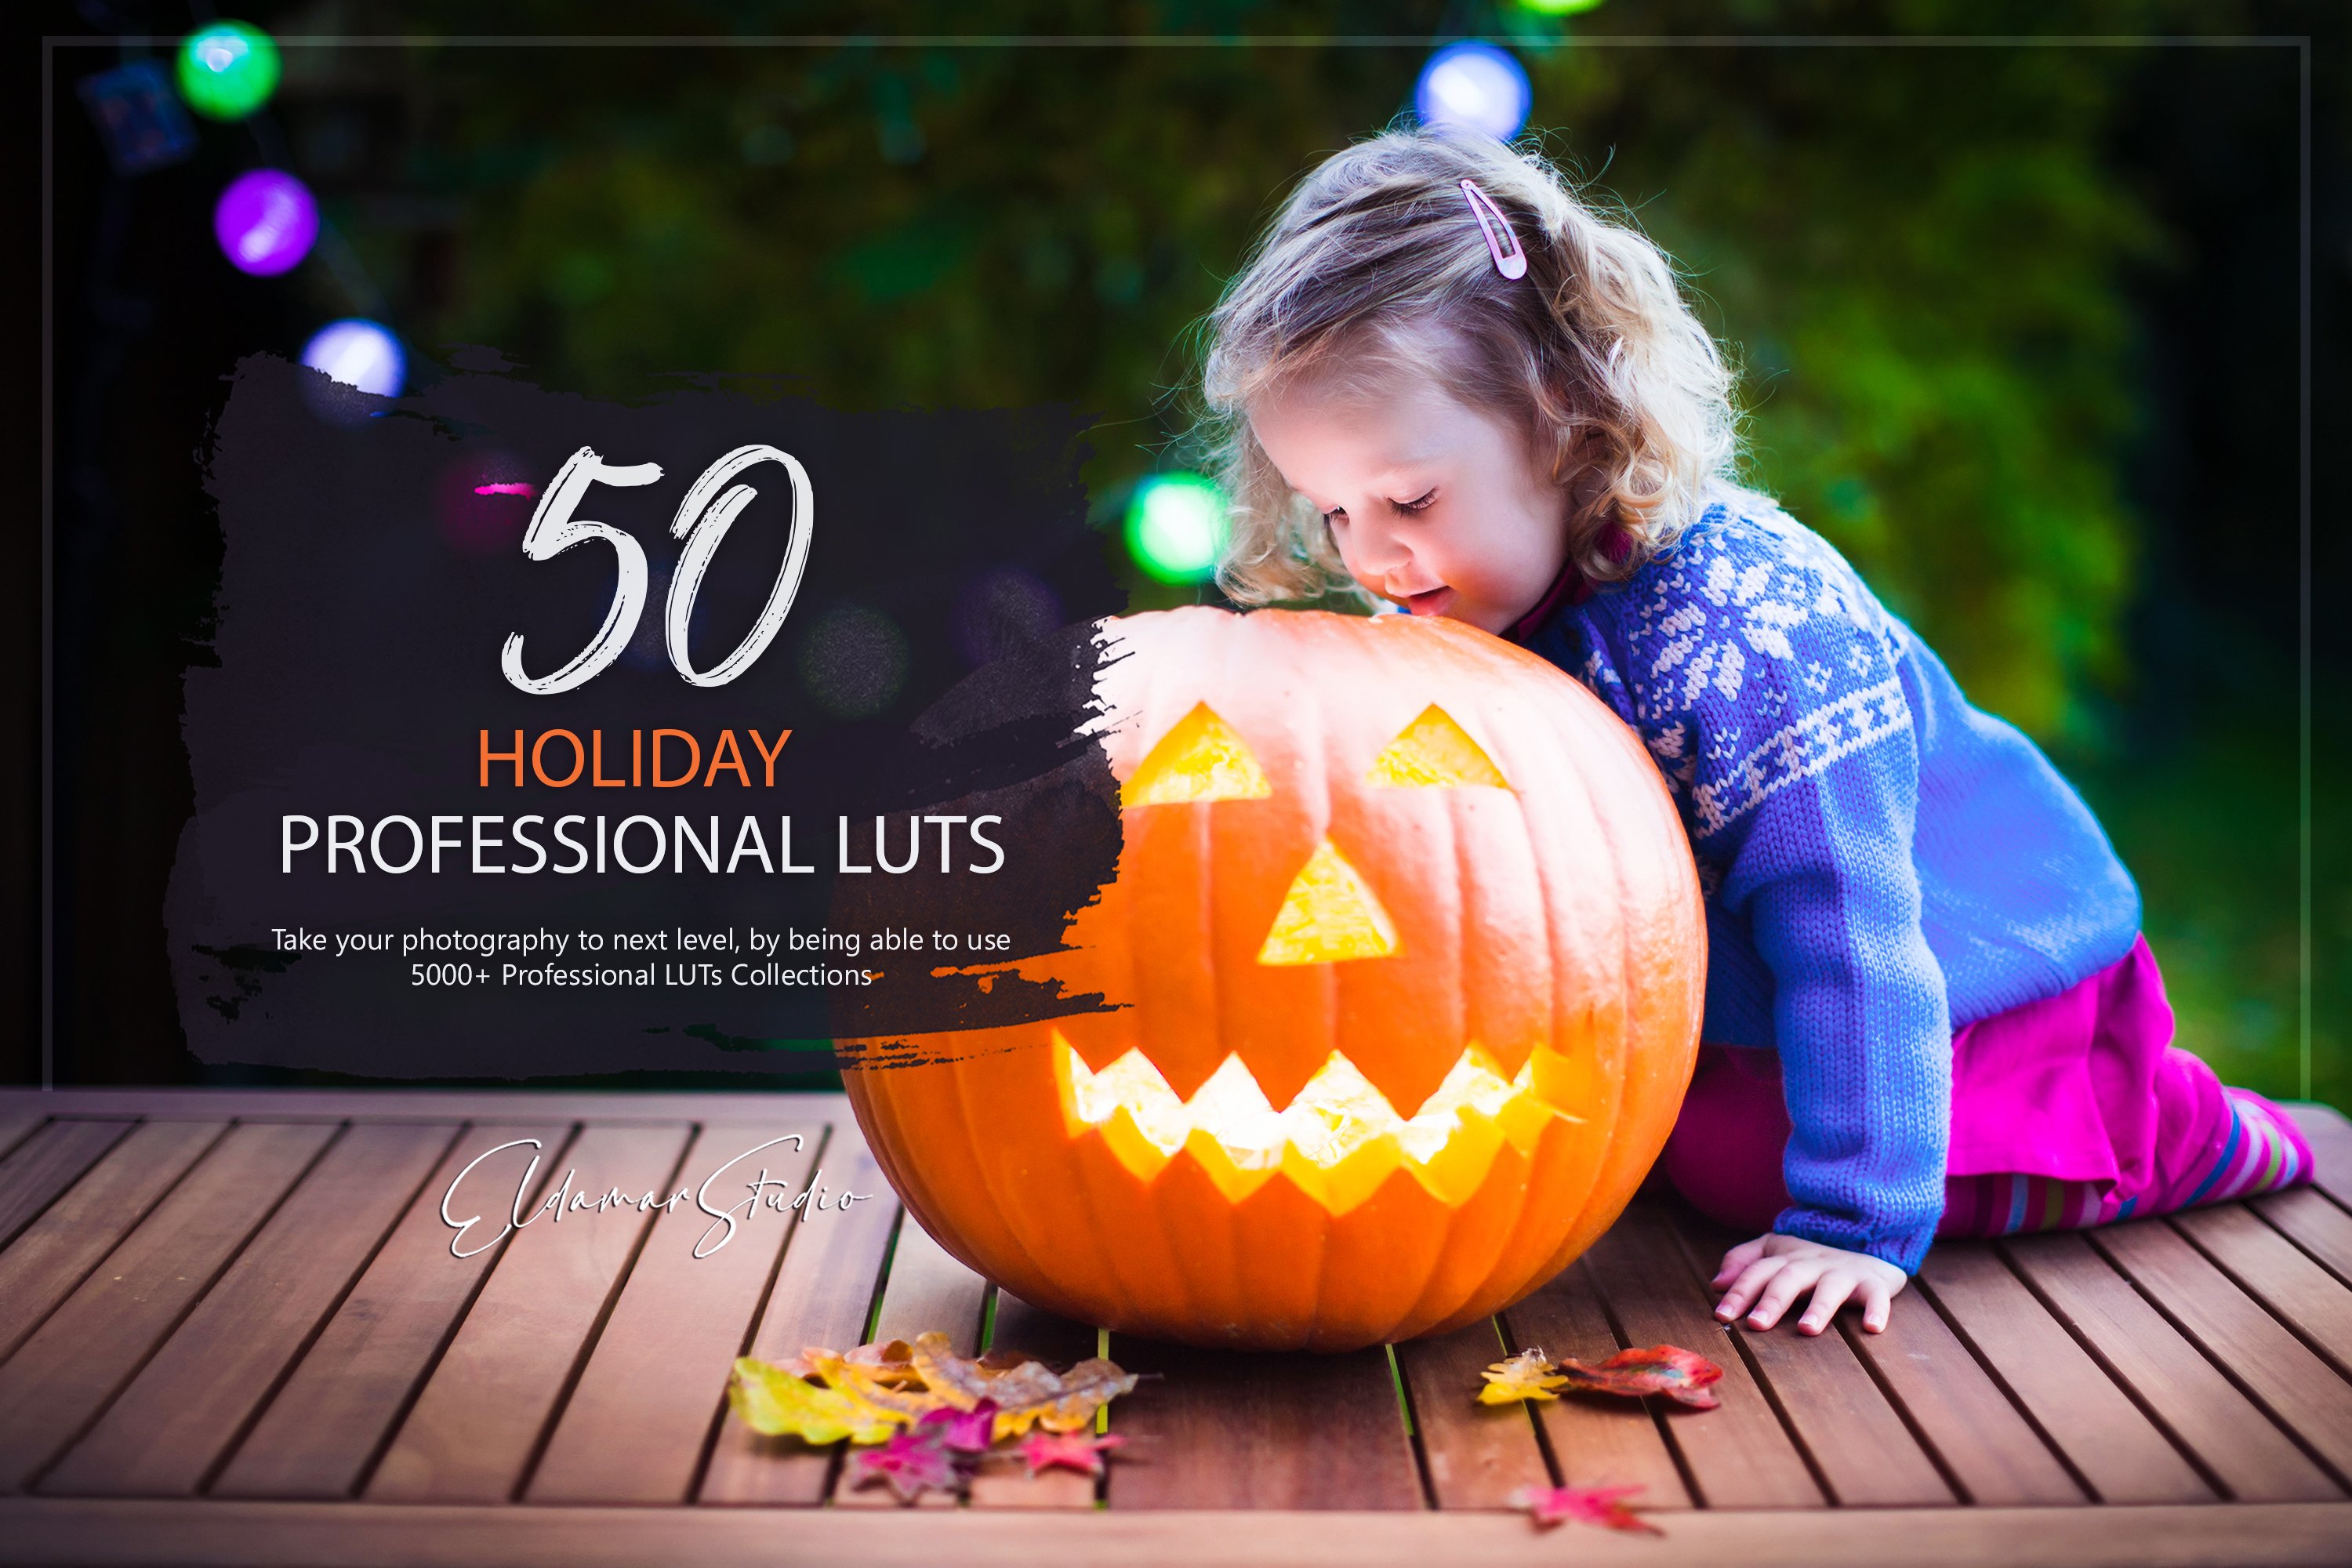 50 Holiday LUTs Packcover image.